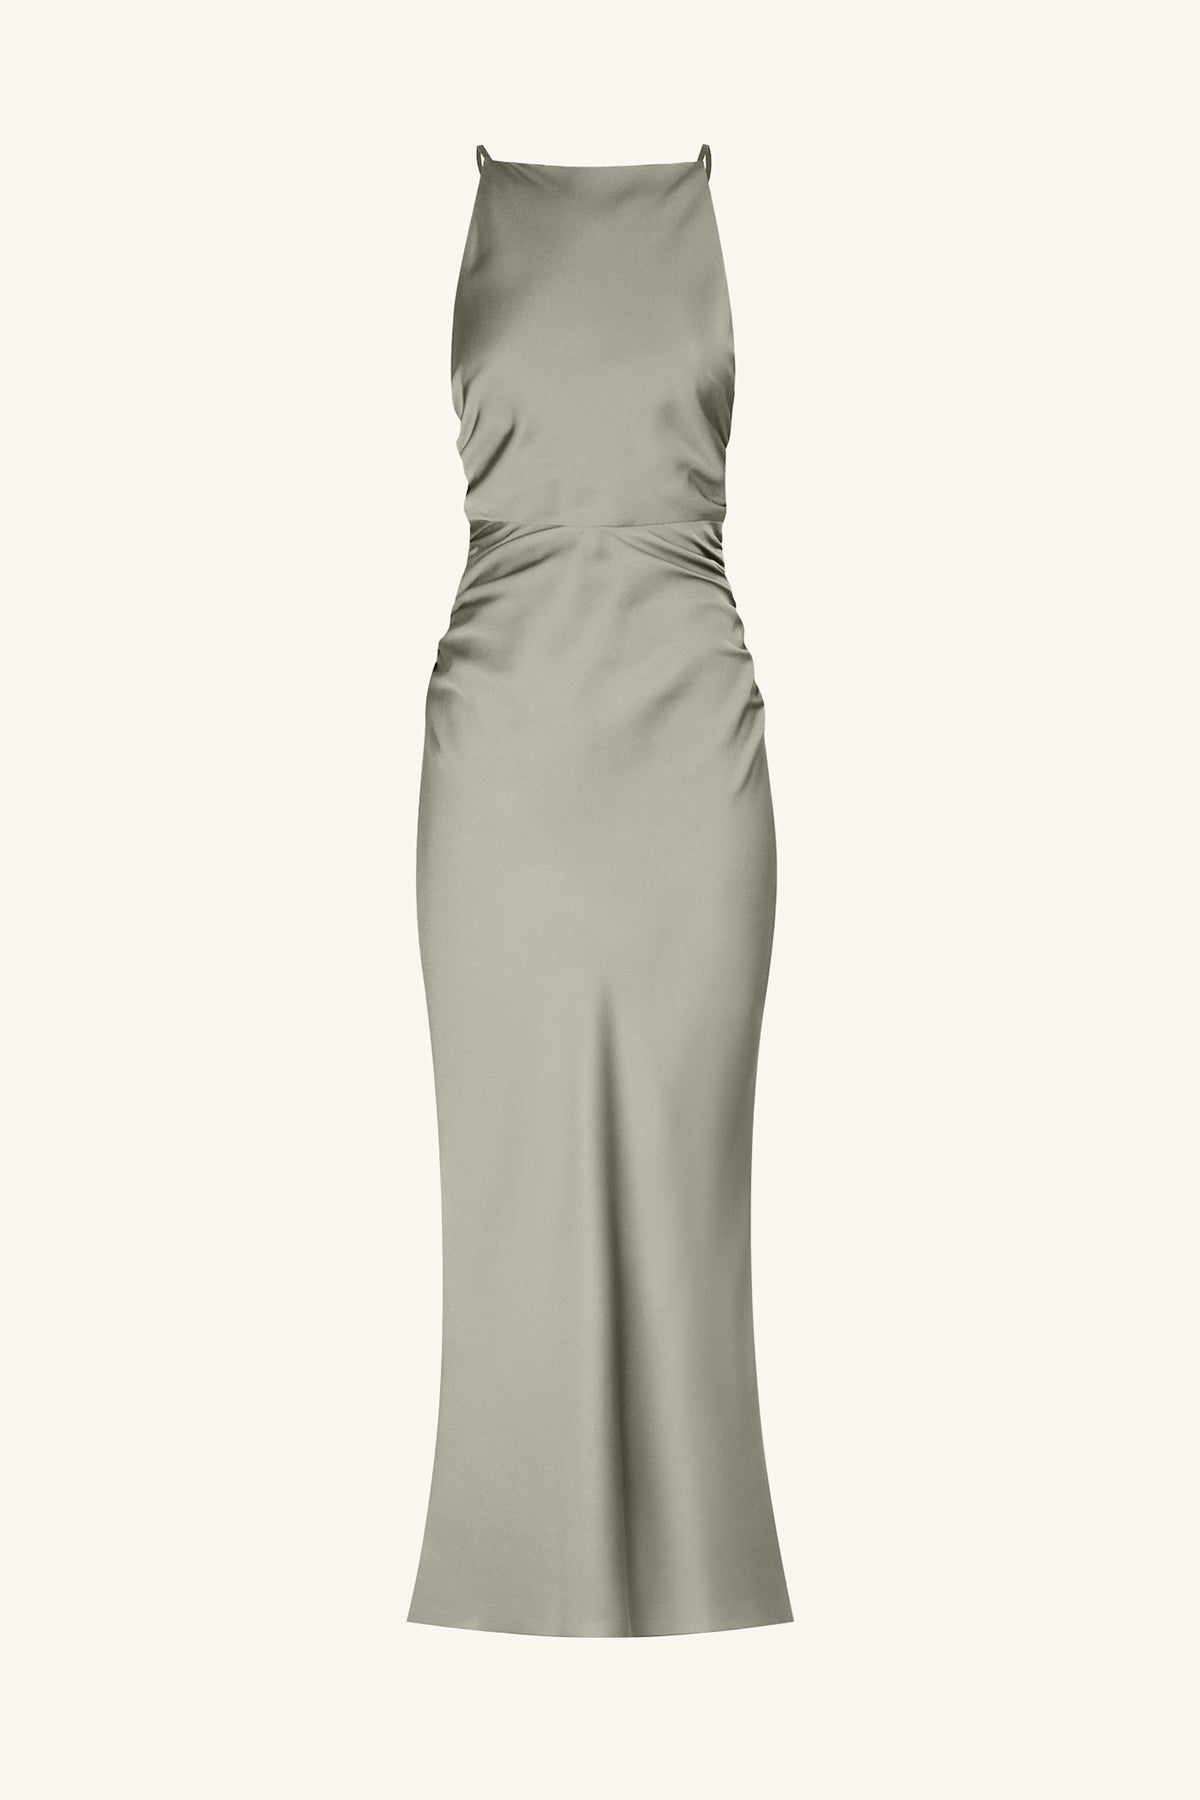 Luxe High Neck Ruched Midi Dress, Eucalyptus, Dresses